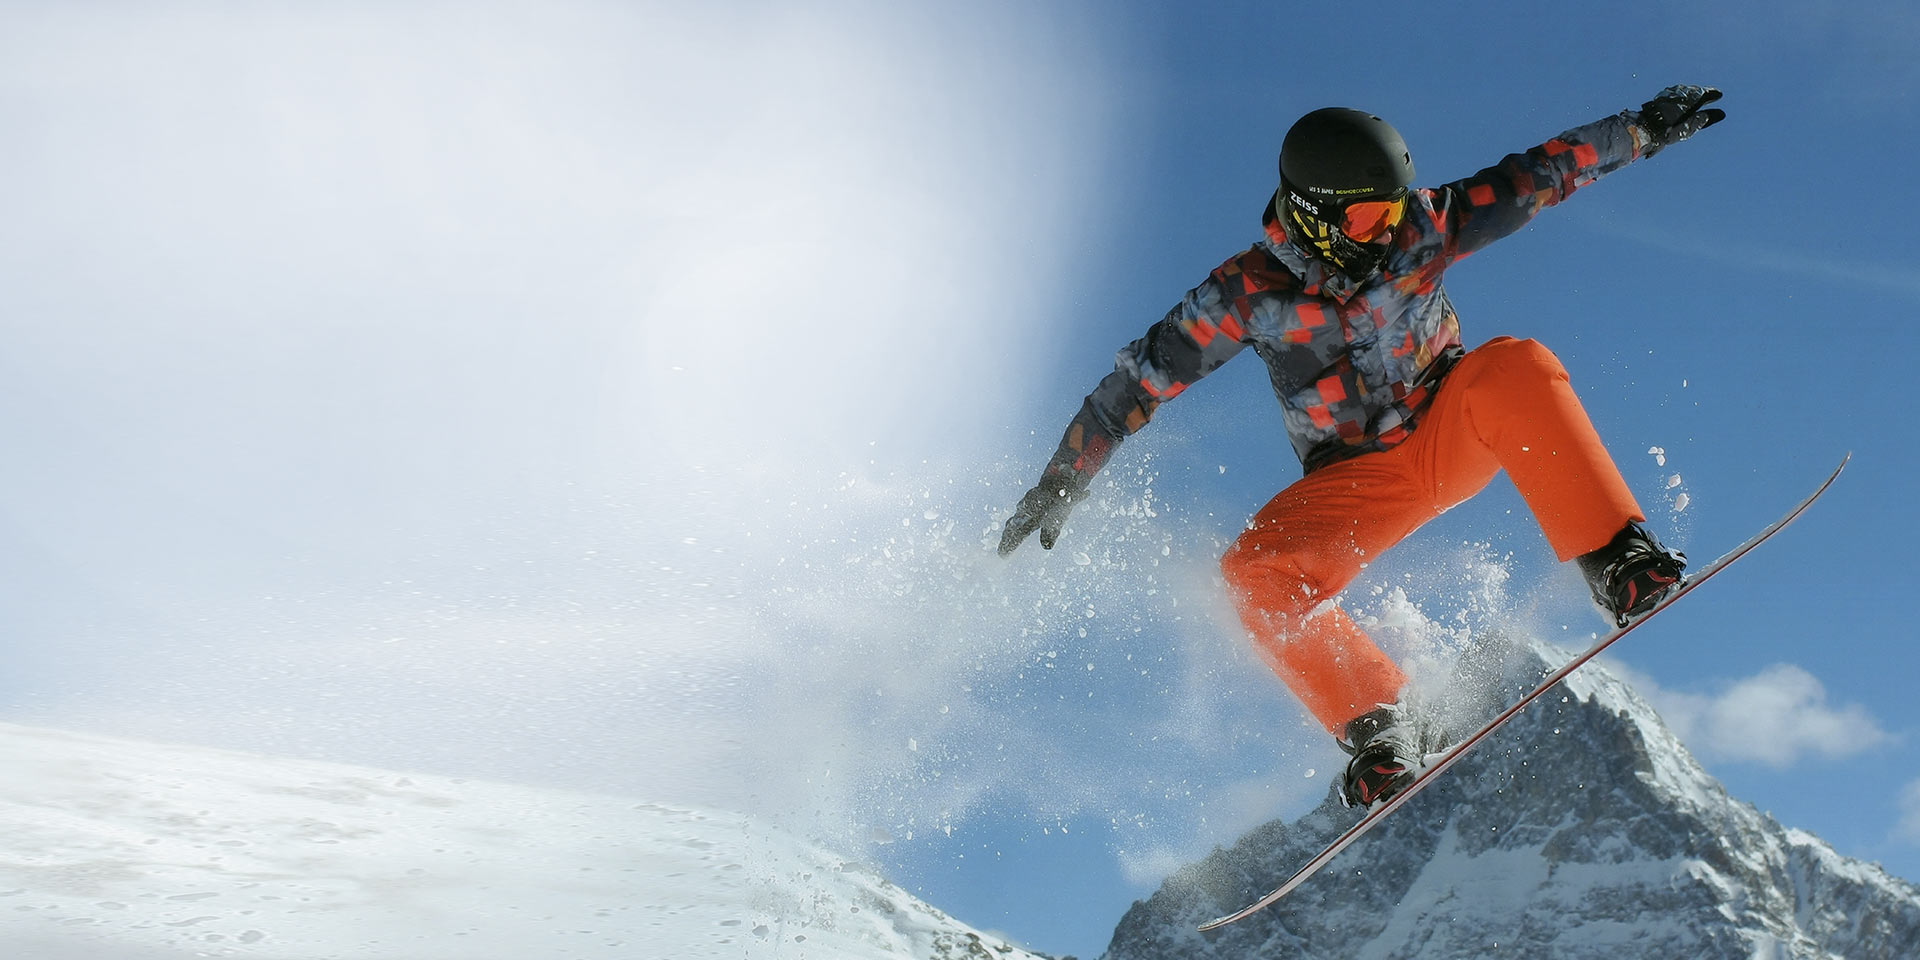 A man jumps with a snowboard, wears a black ski helmet and ZEISS snow goggles with Interchargeable technology for protection